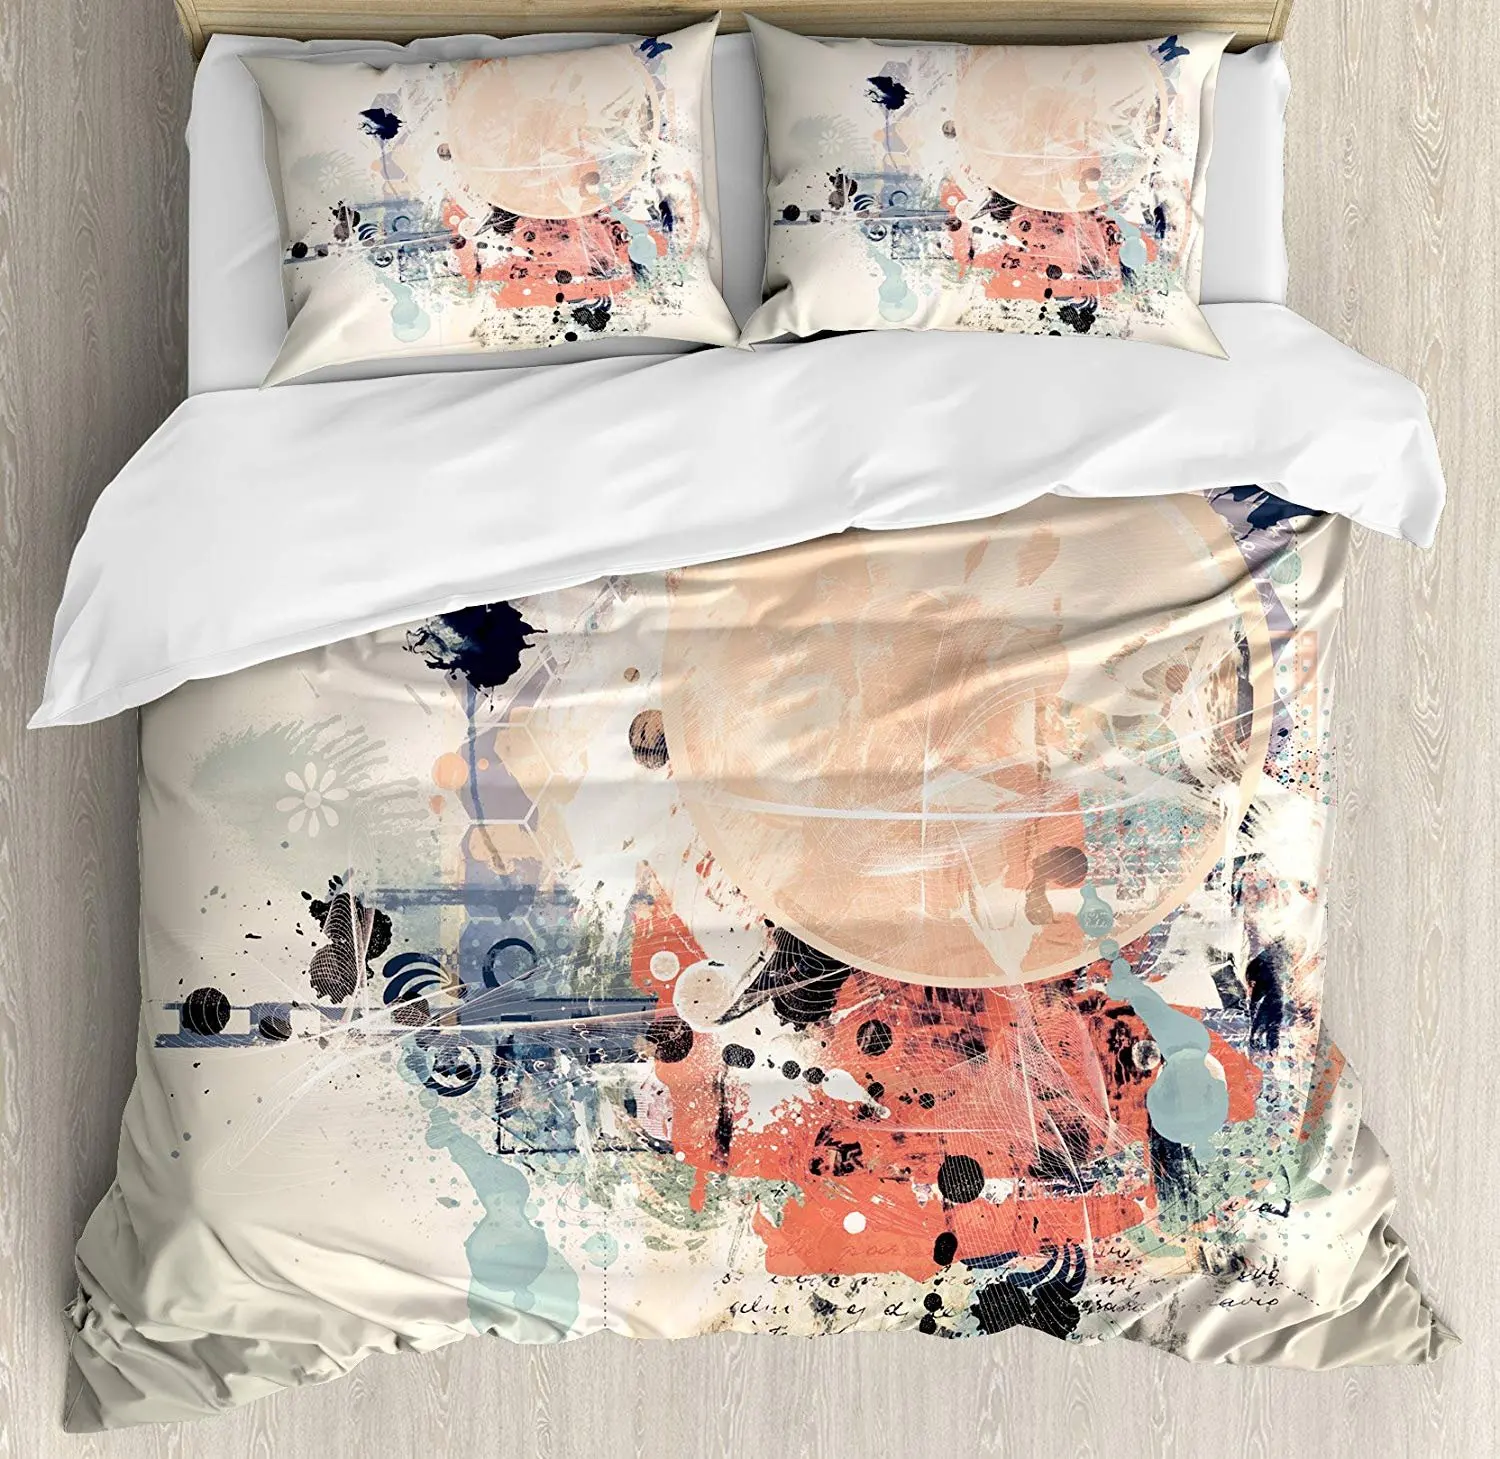 

Abstract Bedding Set Grunge Textured Mix Collage with Murky Tone Effects Artistic Watercolor Design Duvet Cover Pillowcase